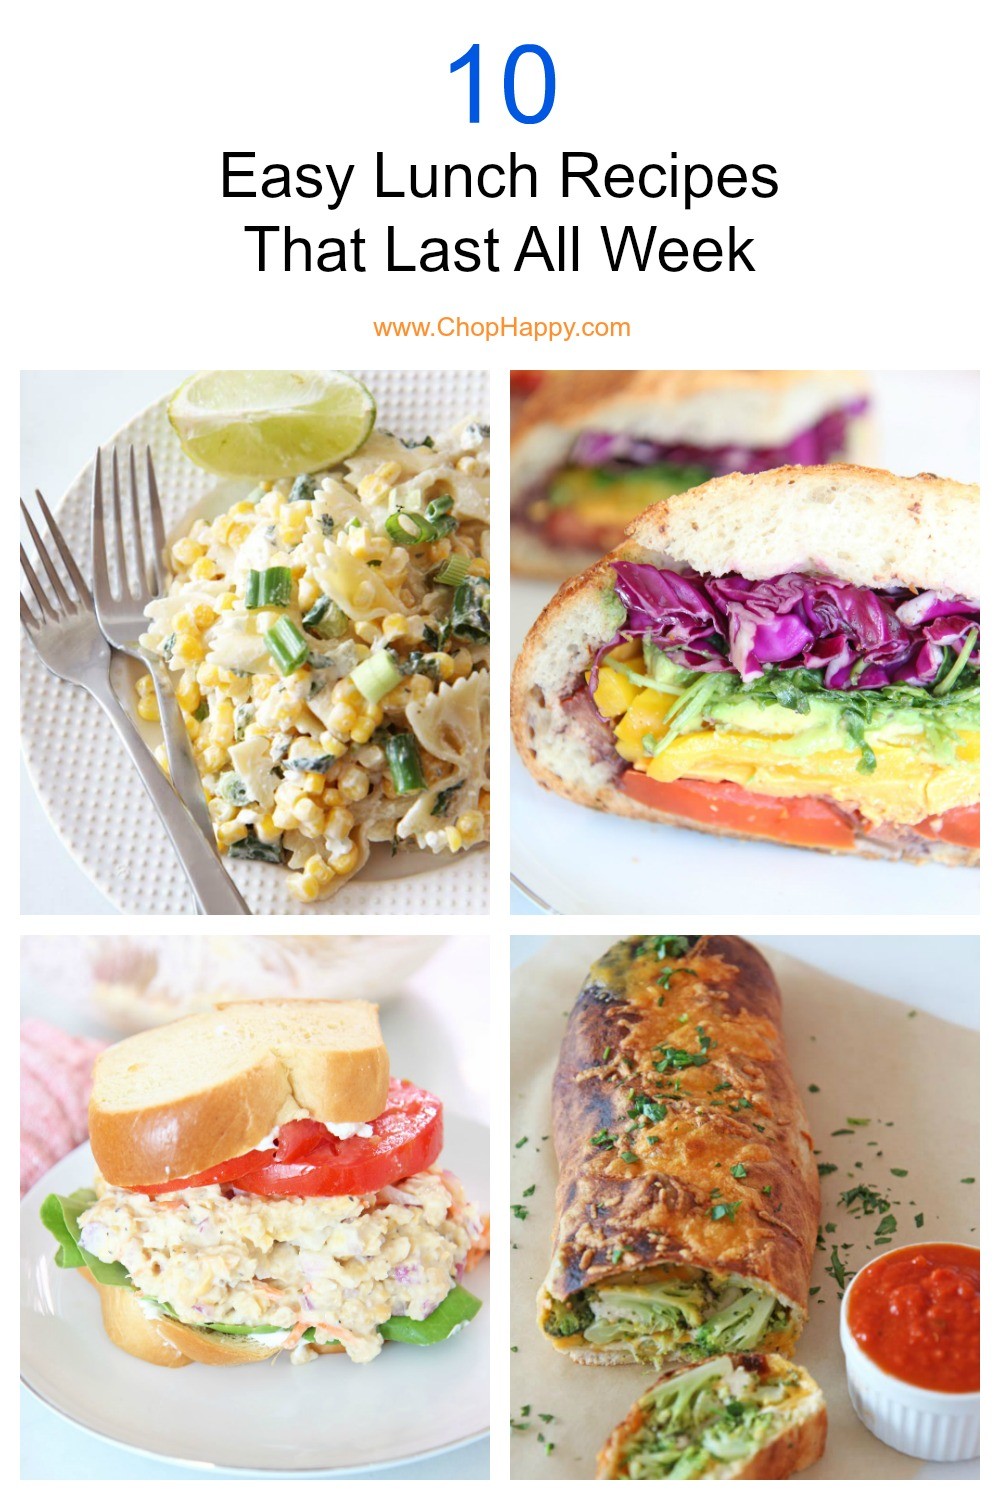 10 Easy Lunch Recipes That Last All Week. Meal prep lunch with easy sandwiches, pasta salads, tuna, and even chickpea salad. Happy Lunch making! #schoollunchideas #lunchrecipes